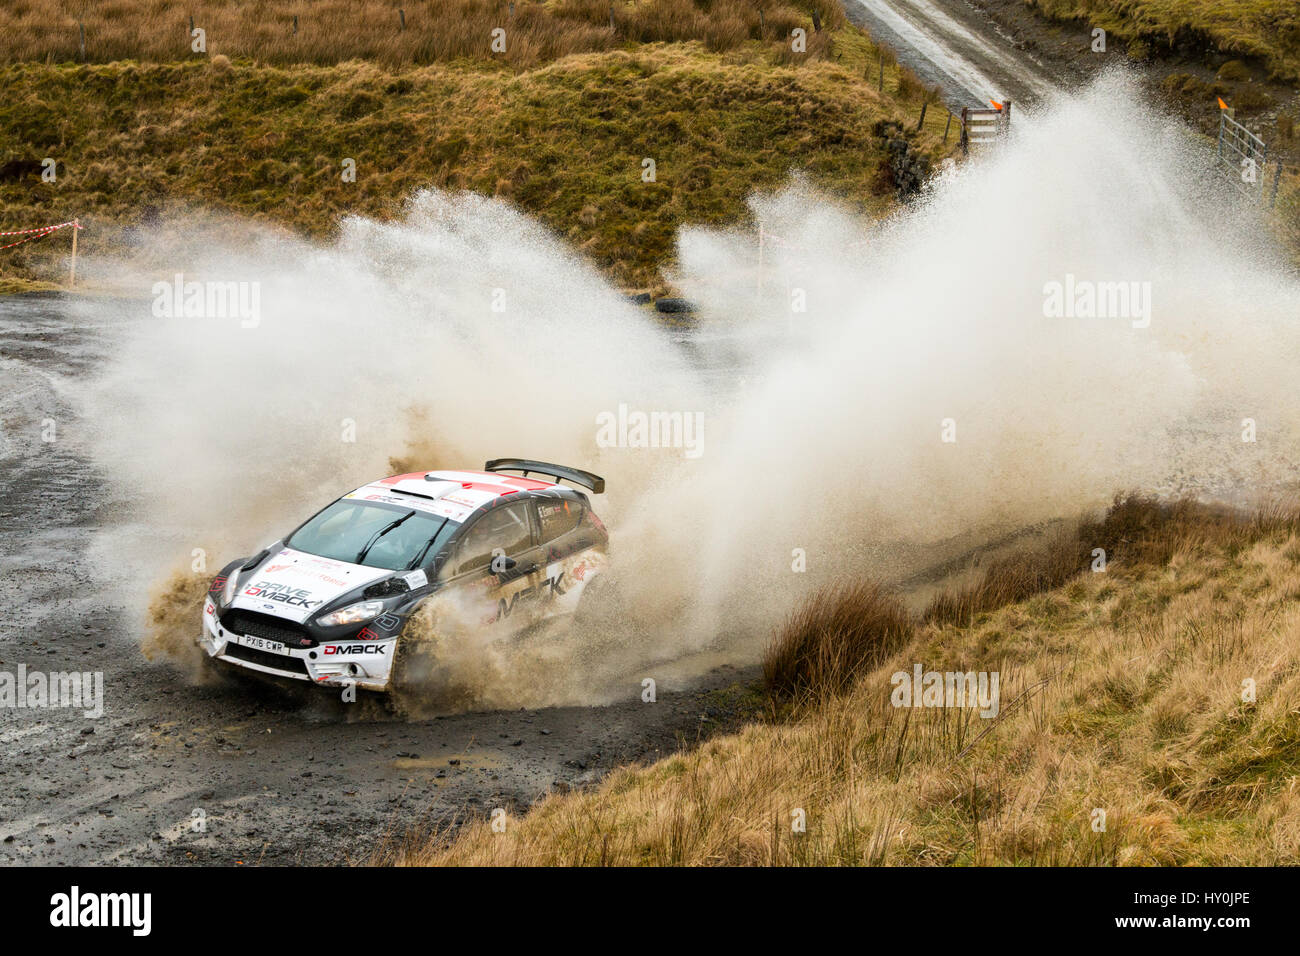 Elfyn Evans in the Ford Fiesta R5 passes through the watersplash on the entry to the Sweet Lamb spectator complex near Newtown in Mid Wales Stock Photo